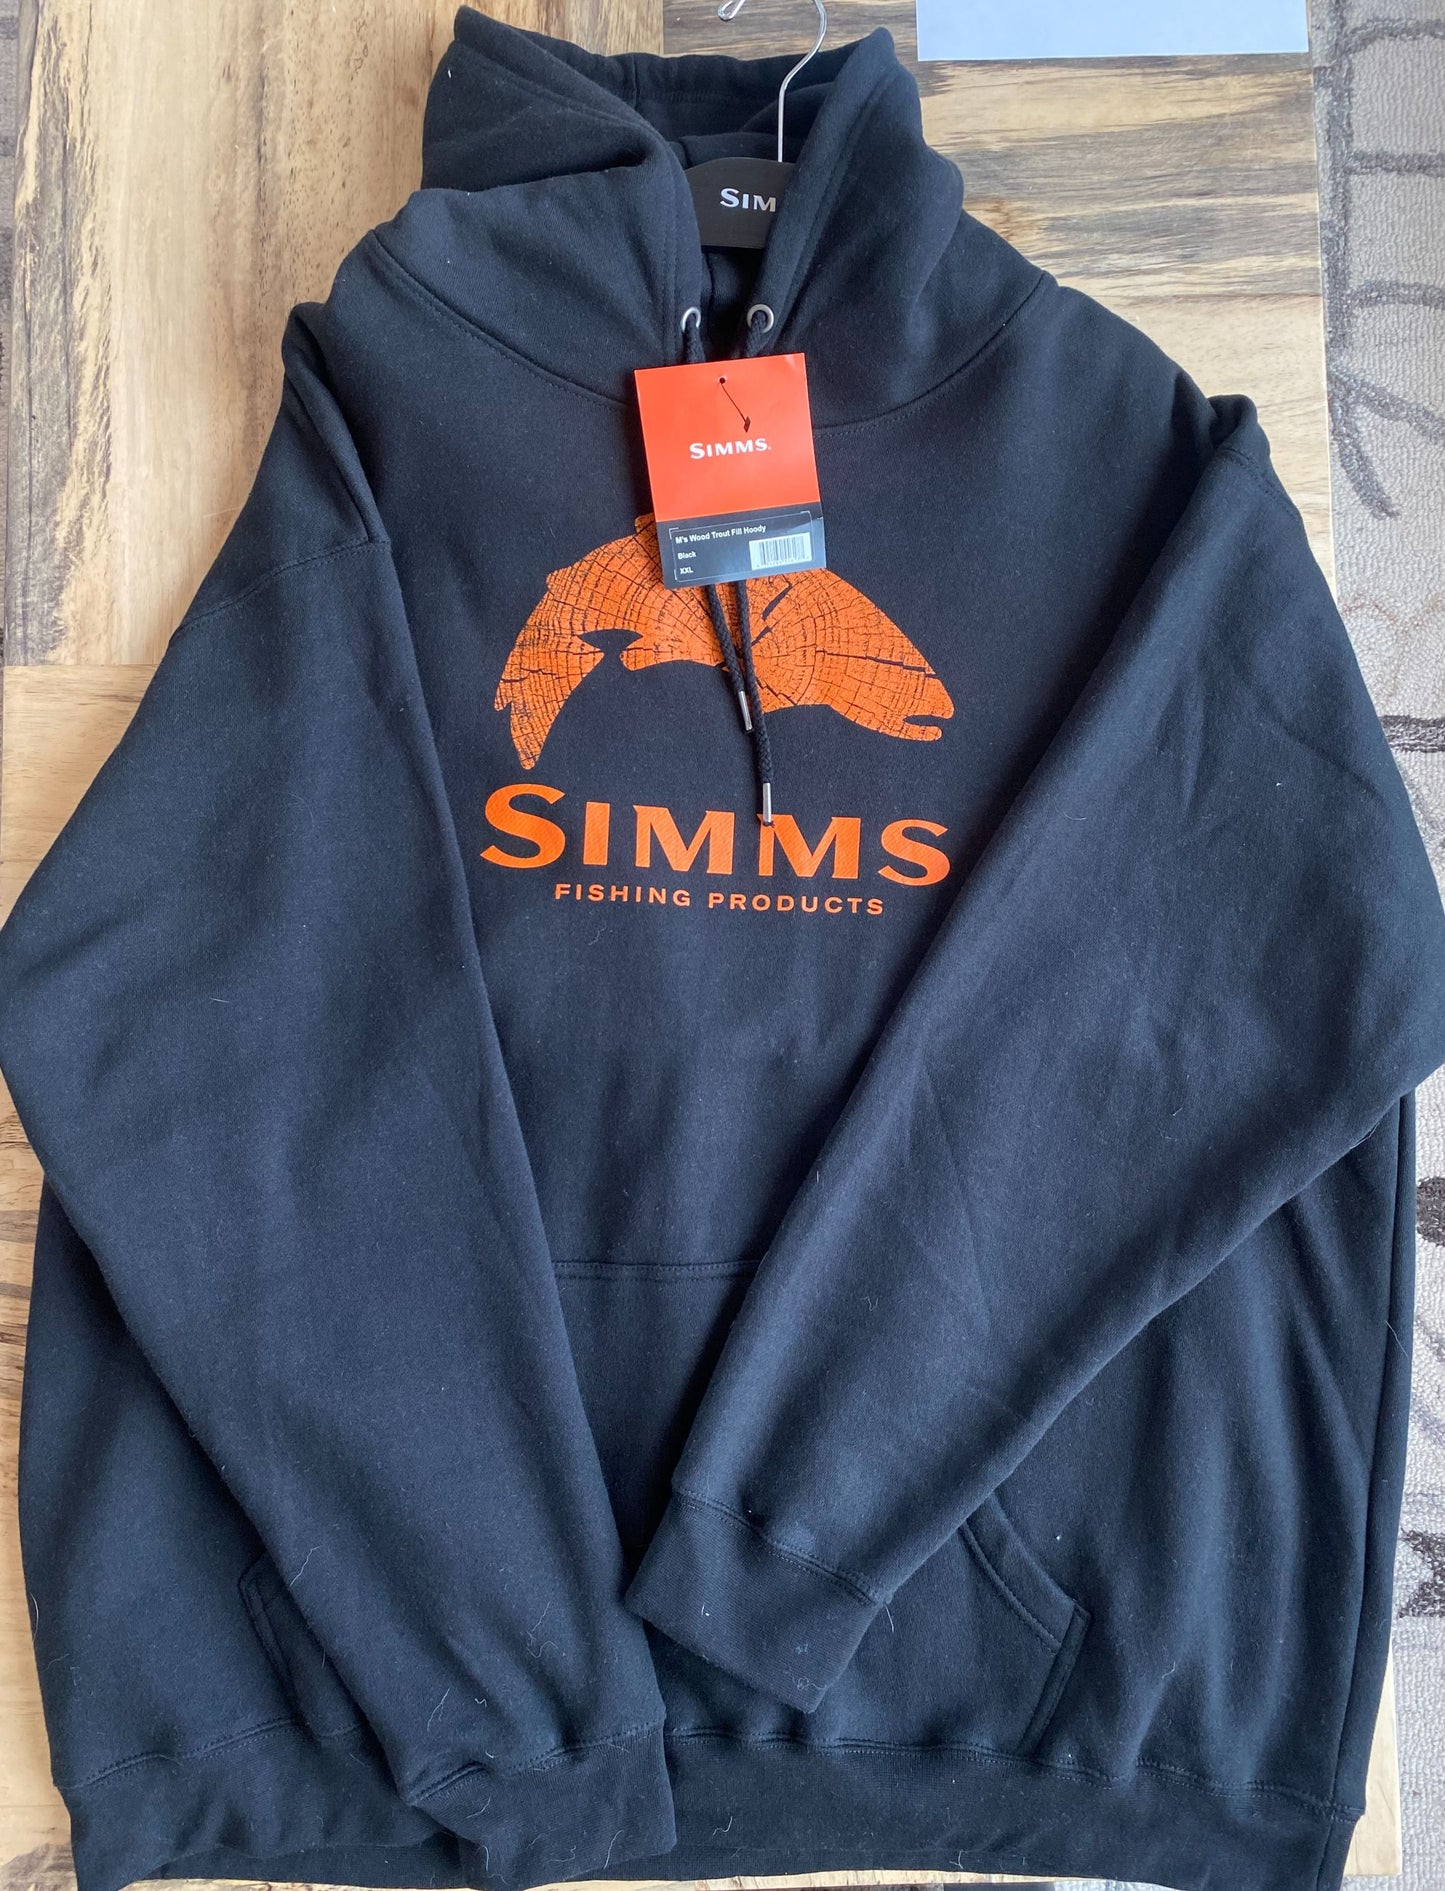 Simms M's Wood Trout Fill Hoody